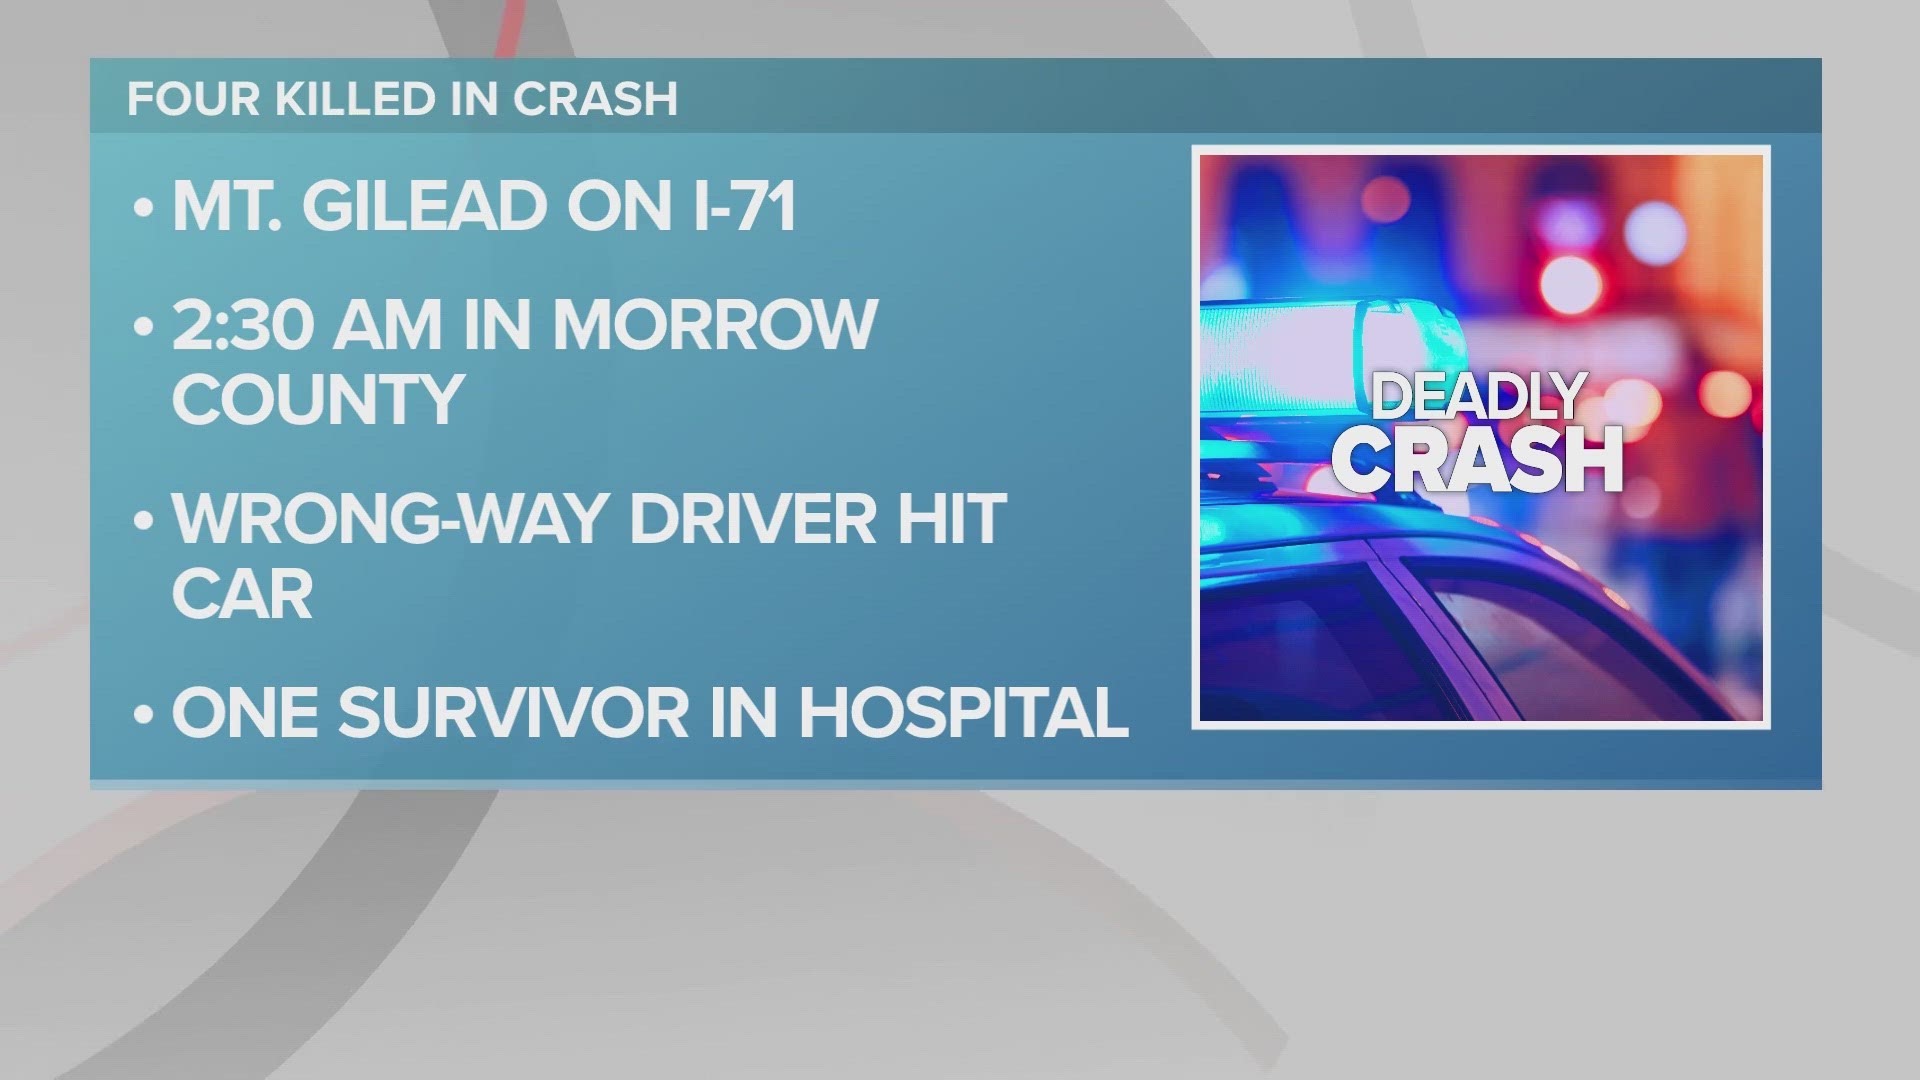 The fatal crash happened near milepost 152 in Franklin Township at approximately 2:38 a.m.